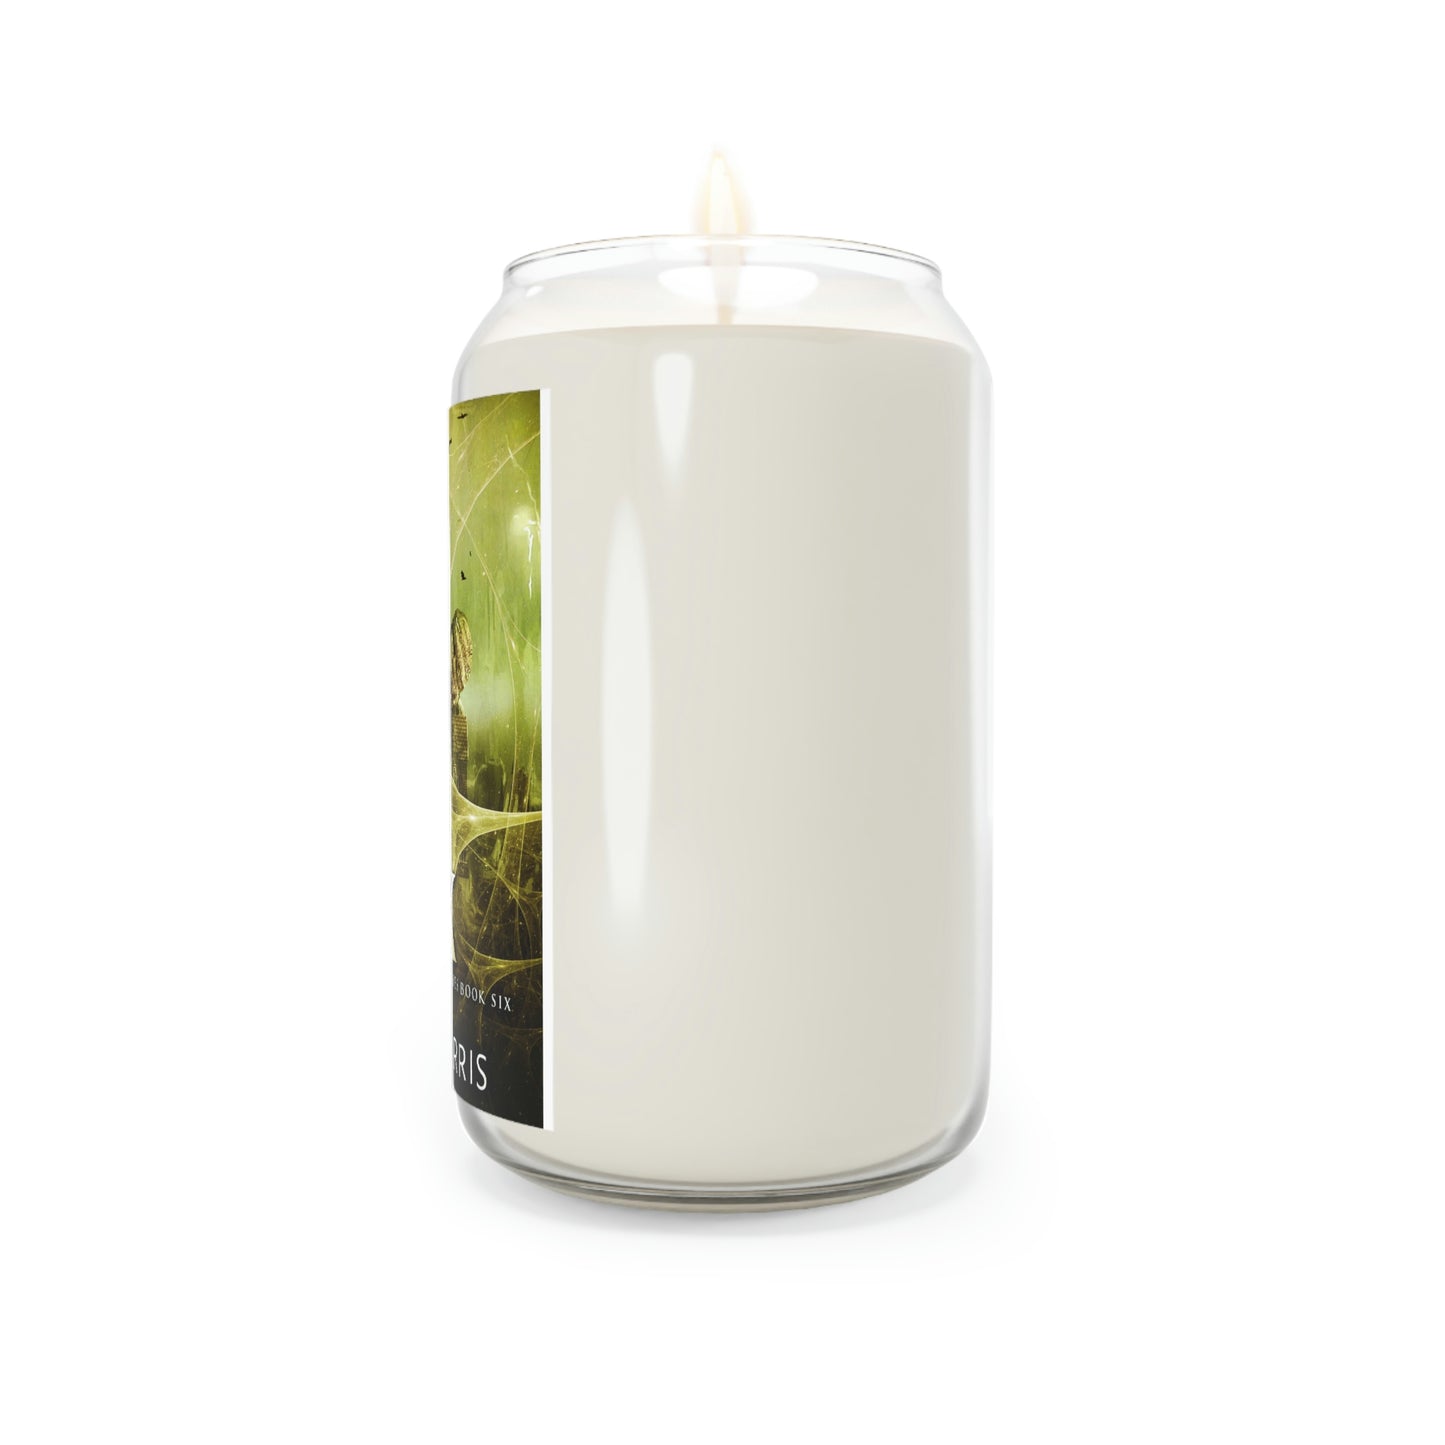 Six - Scented Candle